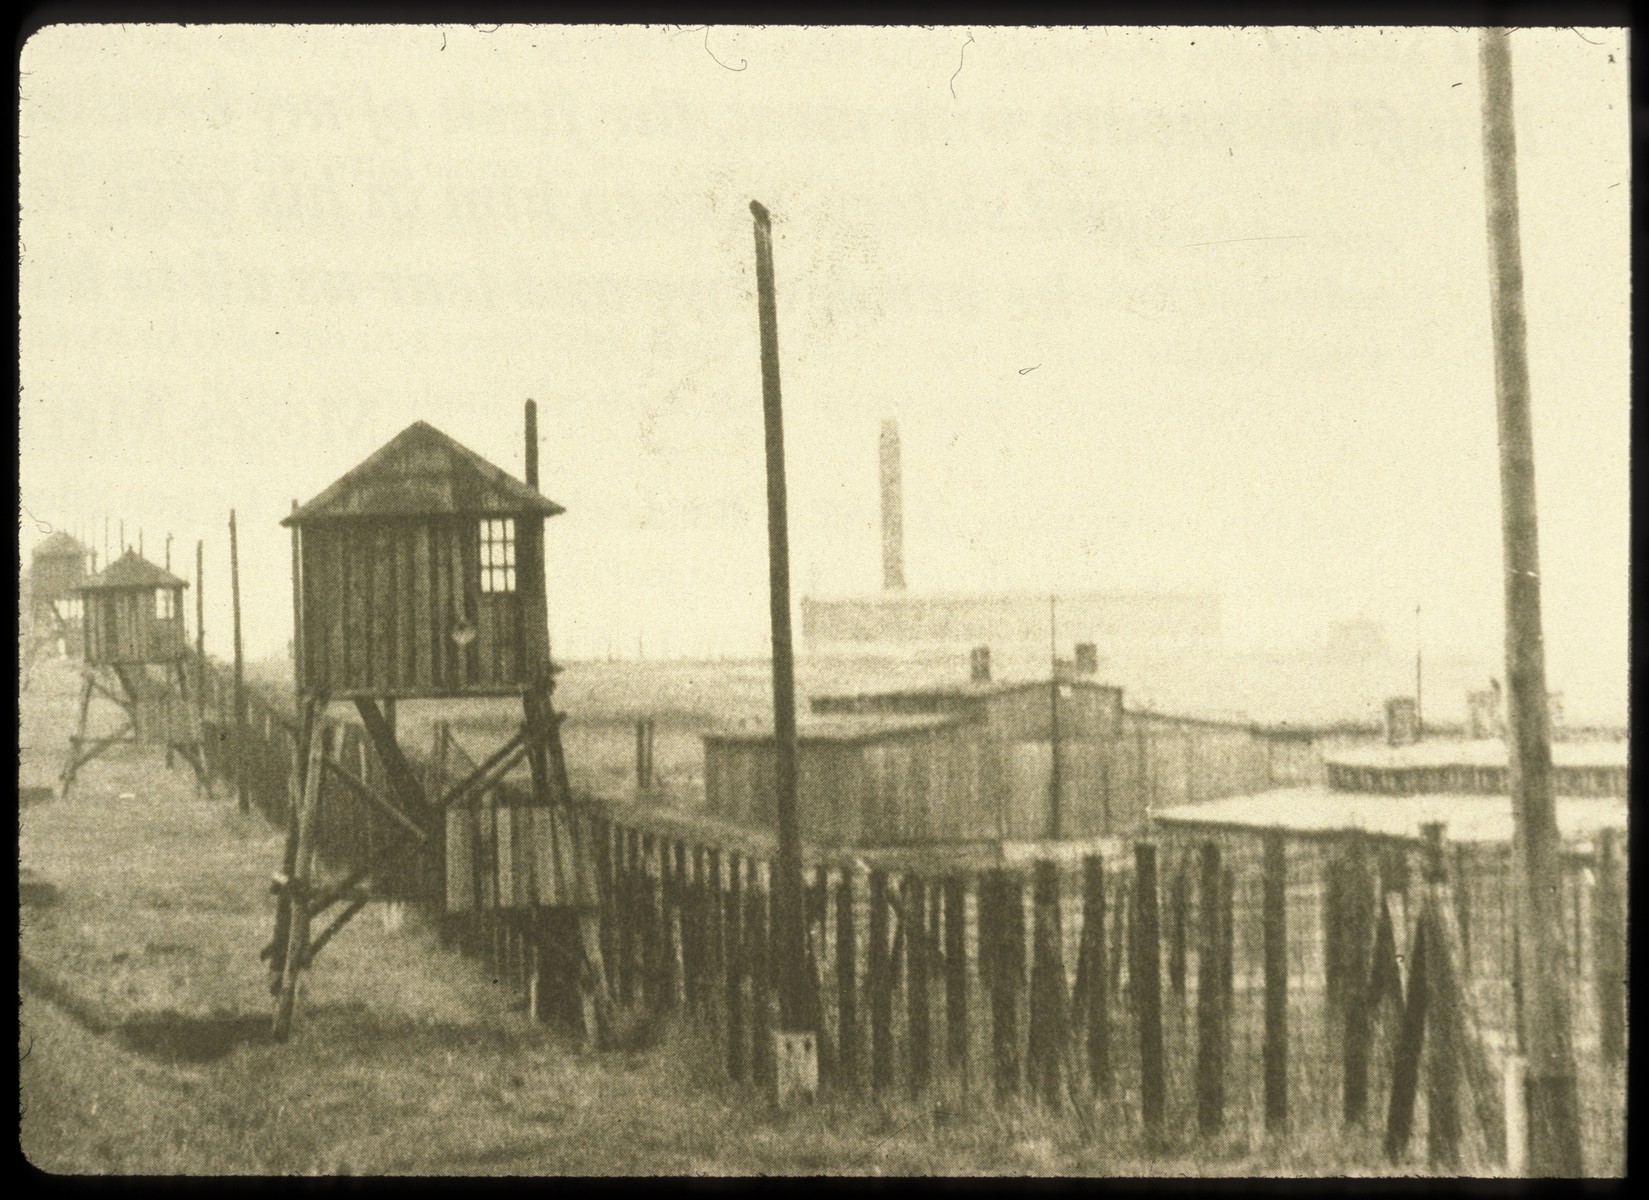 View of the watch towers and fence surrounding the Majdanek concentration camp.